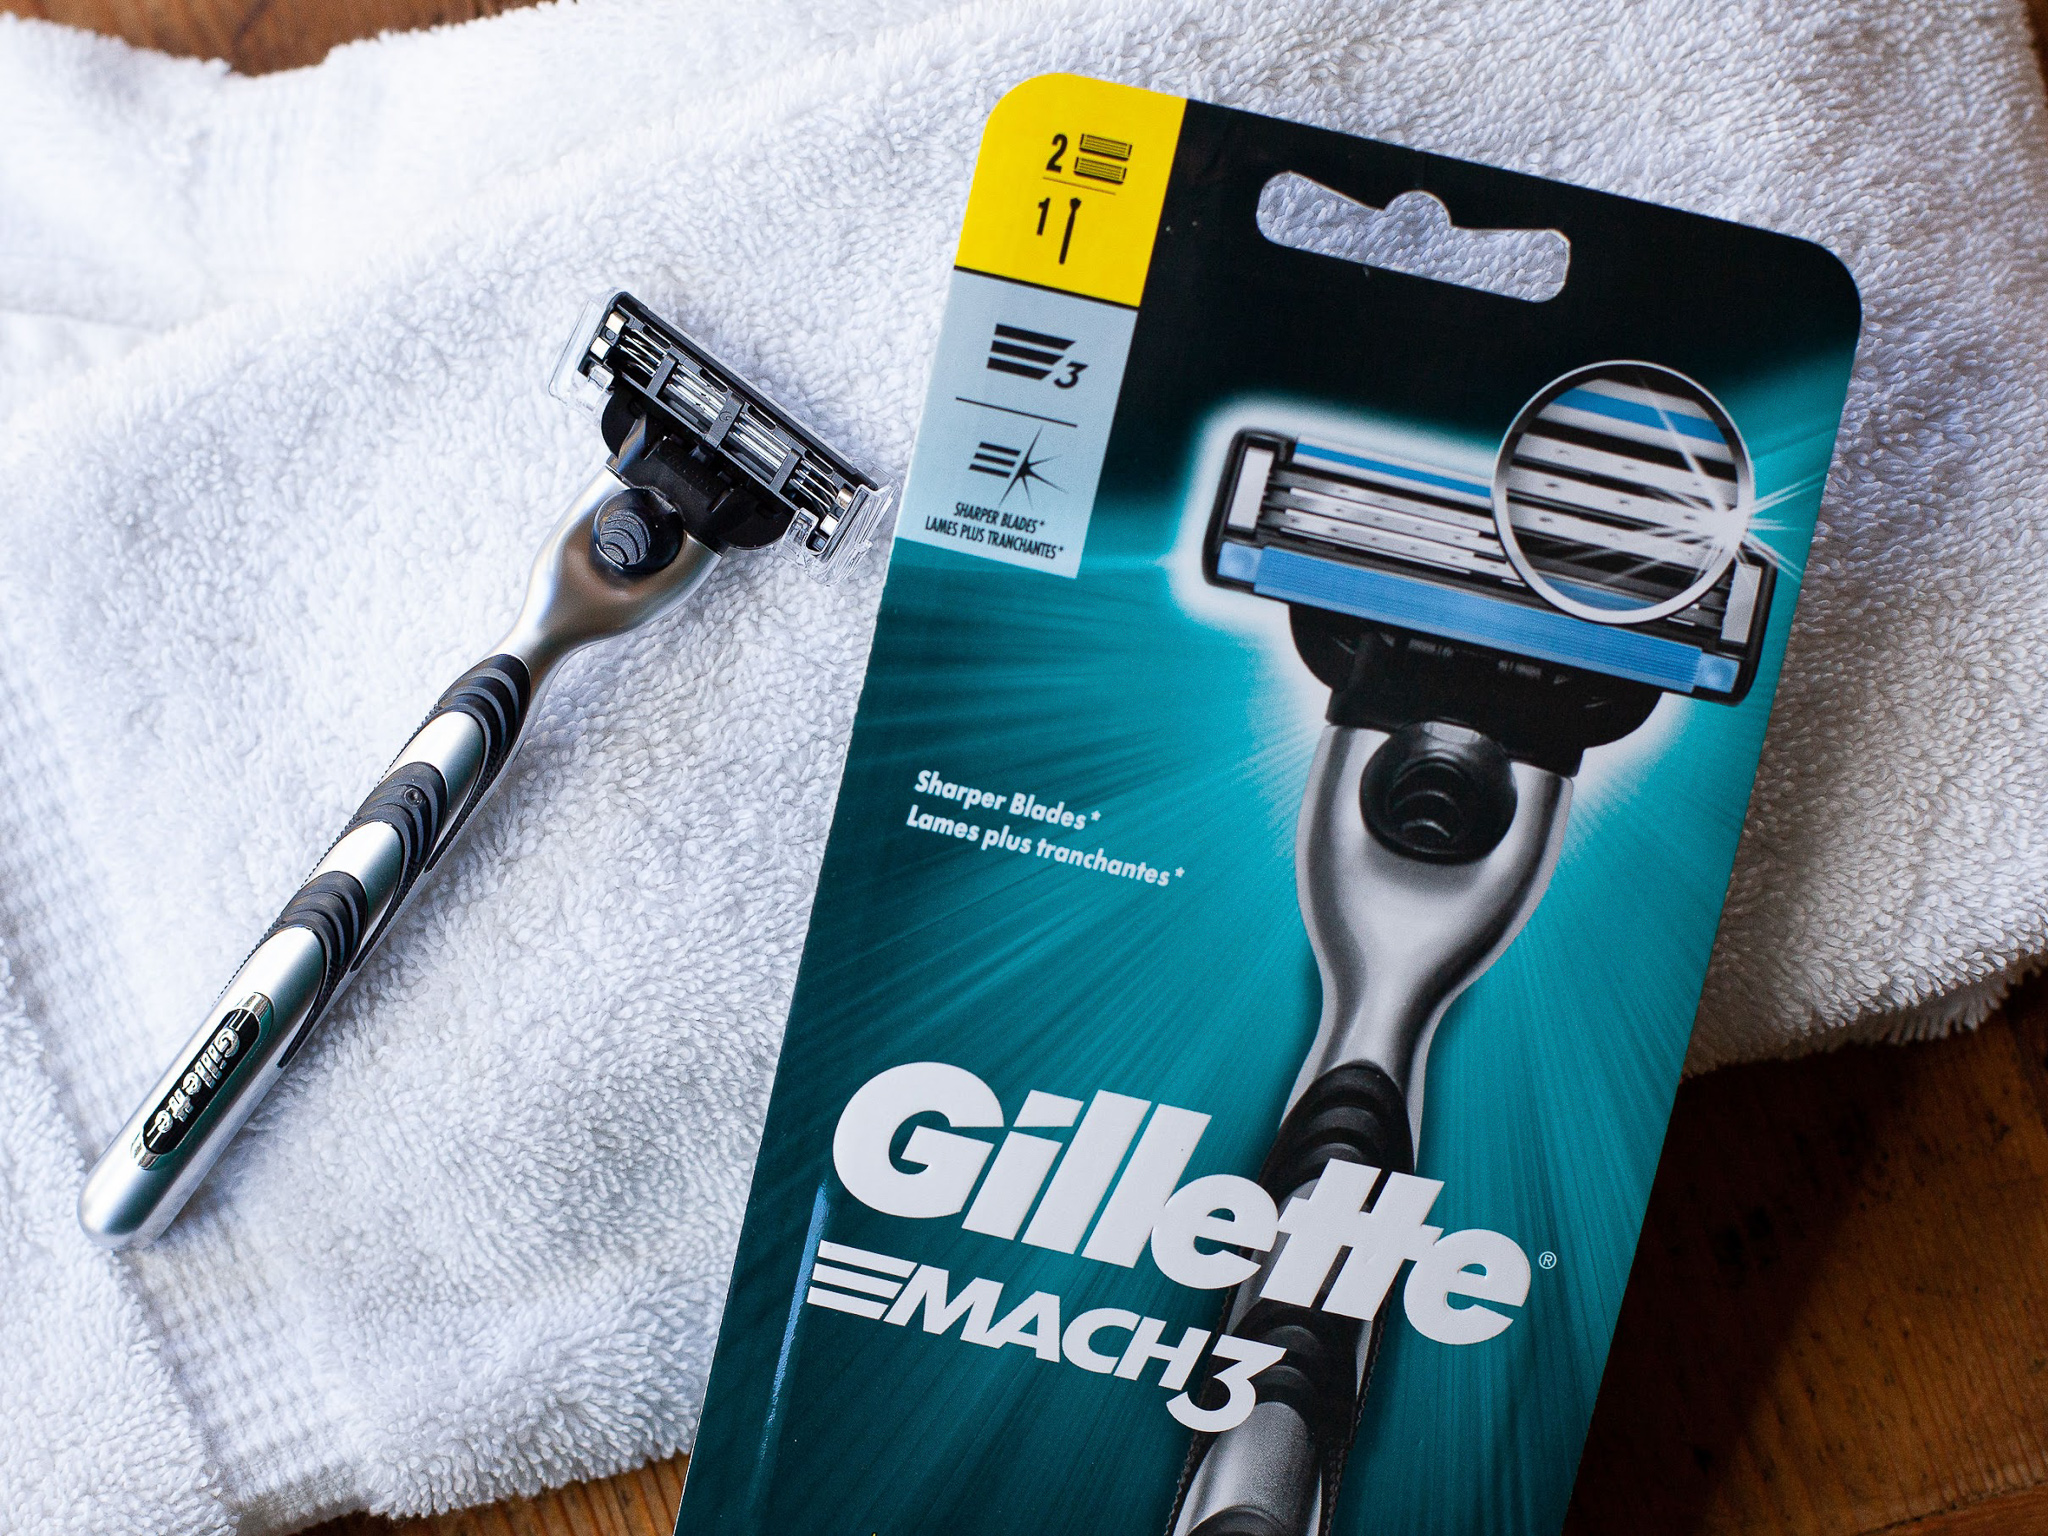 Great Deals On Gillette Razors At Kroger – As Low As 99¢